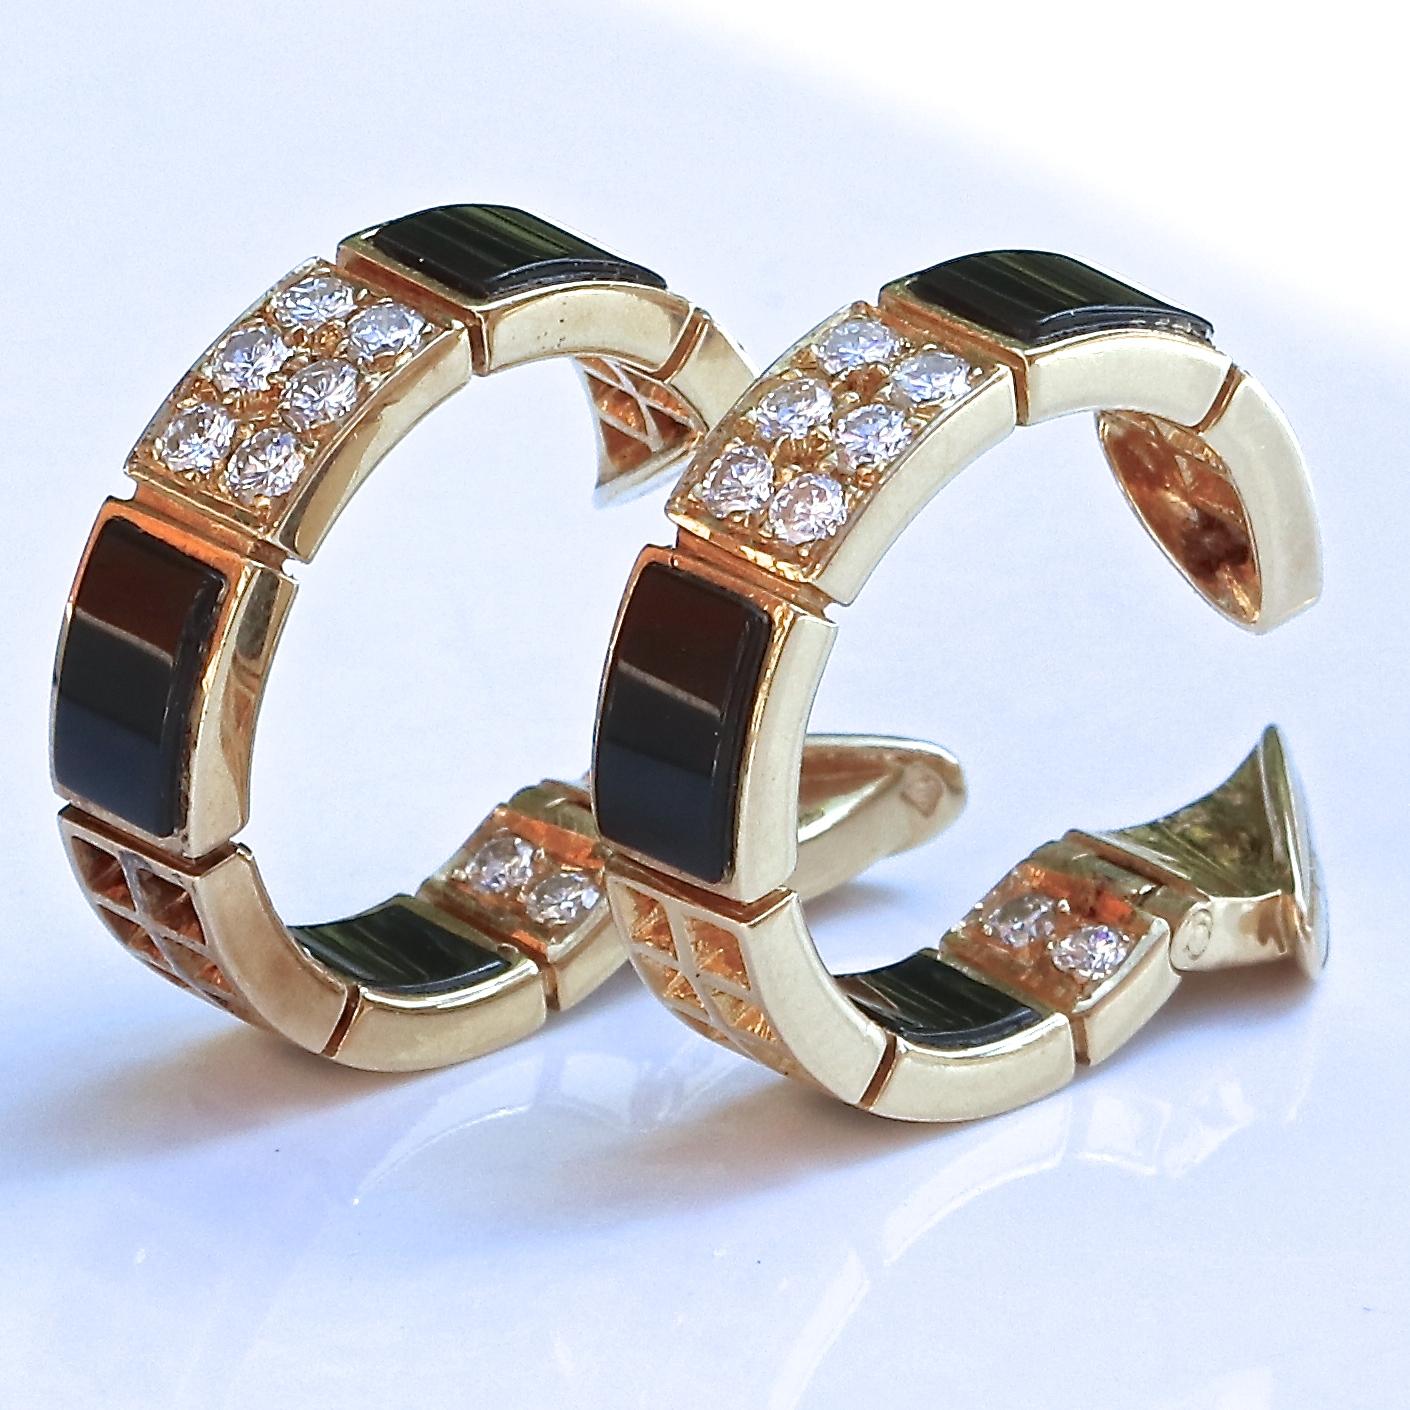 Vintage Van Cleef & Arpels diamond and onyx hoop earrings. Circa 1977 and featuring 38 round brilliant diamonds that weigh approximately 2.44 carats, graded E-F color, VVS clarity. Signed VCA serial #C3101X2. 